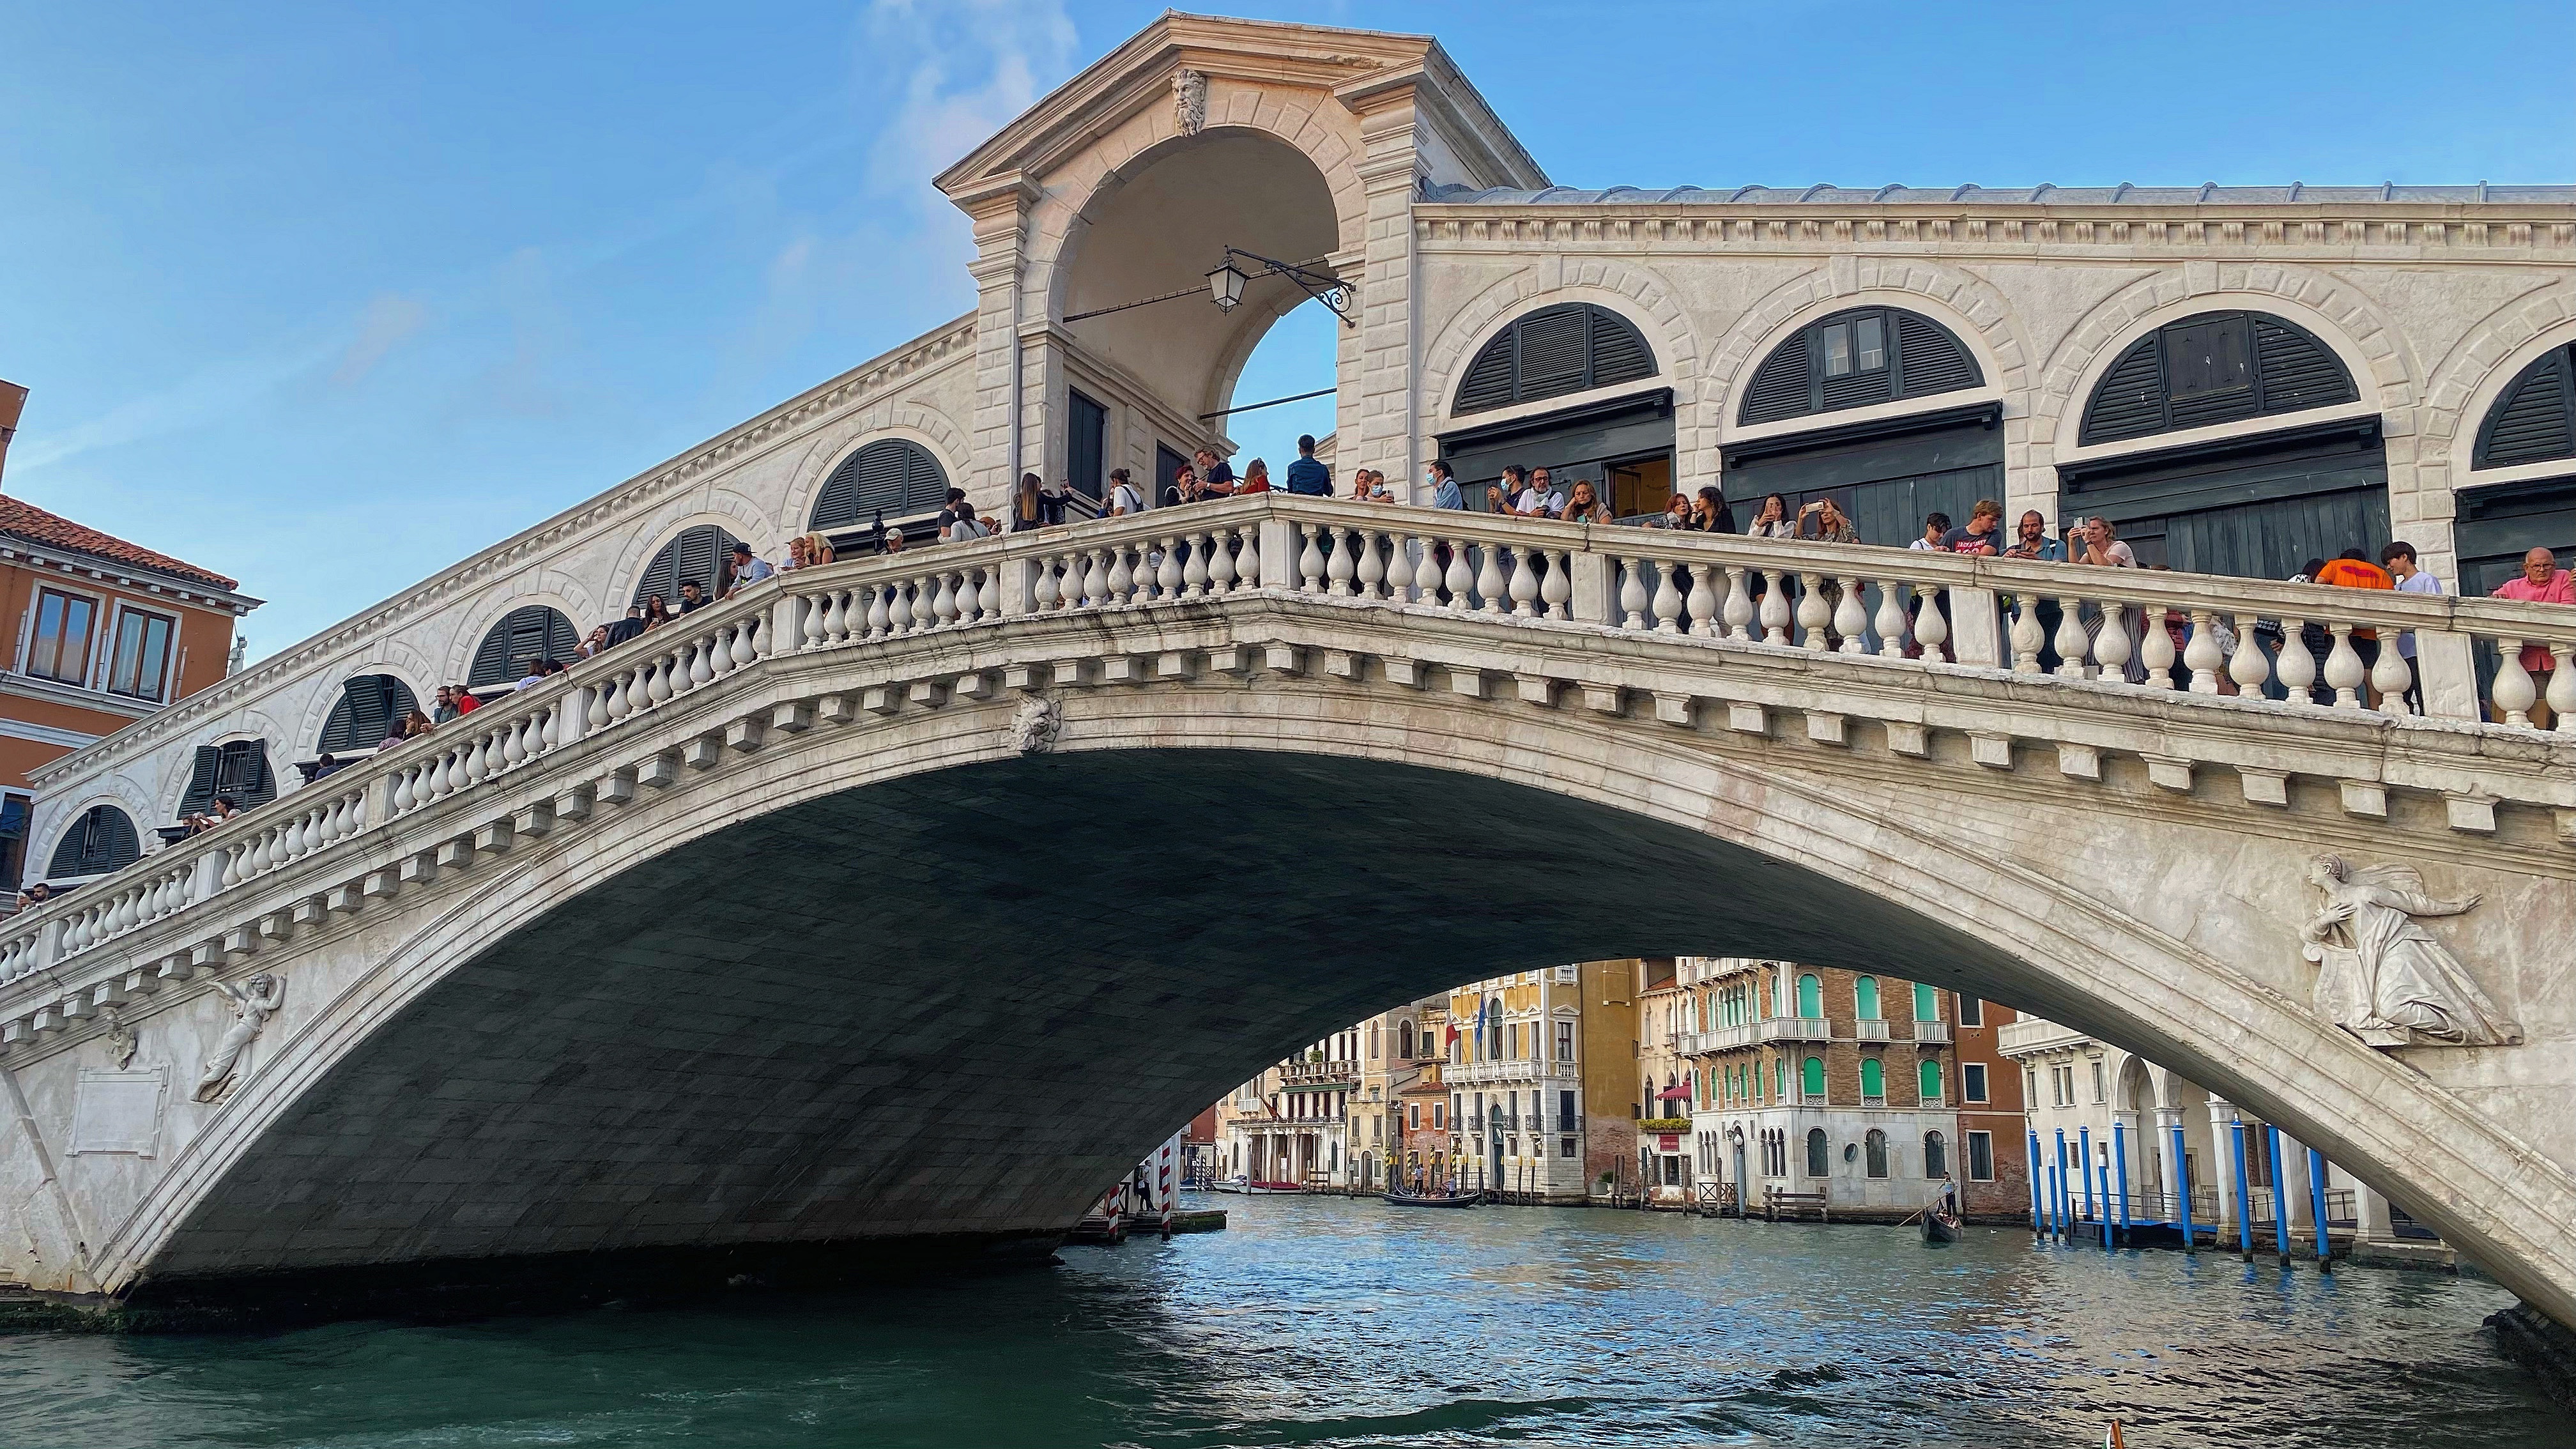 24 hours in Venice. Bridge of Rialto on Grand Canal on Venice post-pandemic.